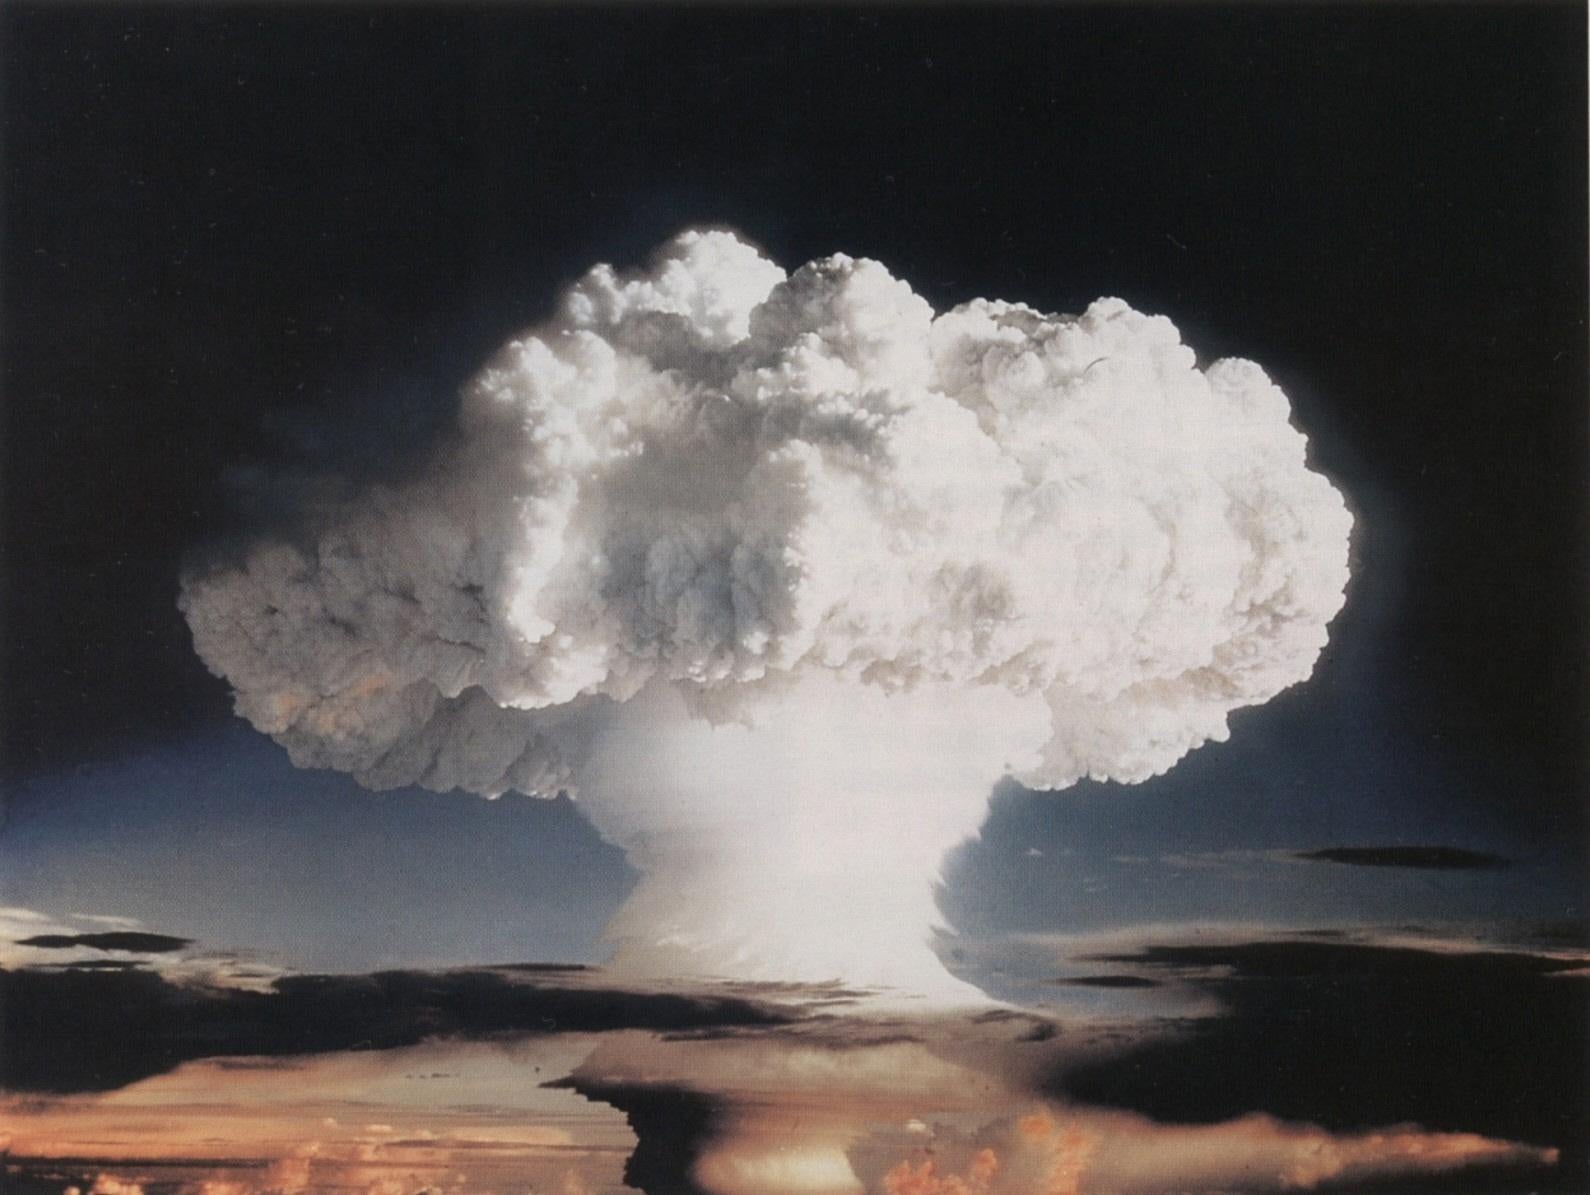 The USA detonated Ivy Mike, the first successful hydrogen bomb, in 1952